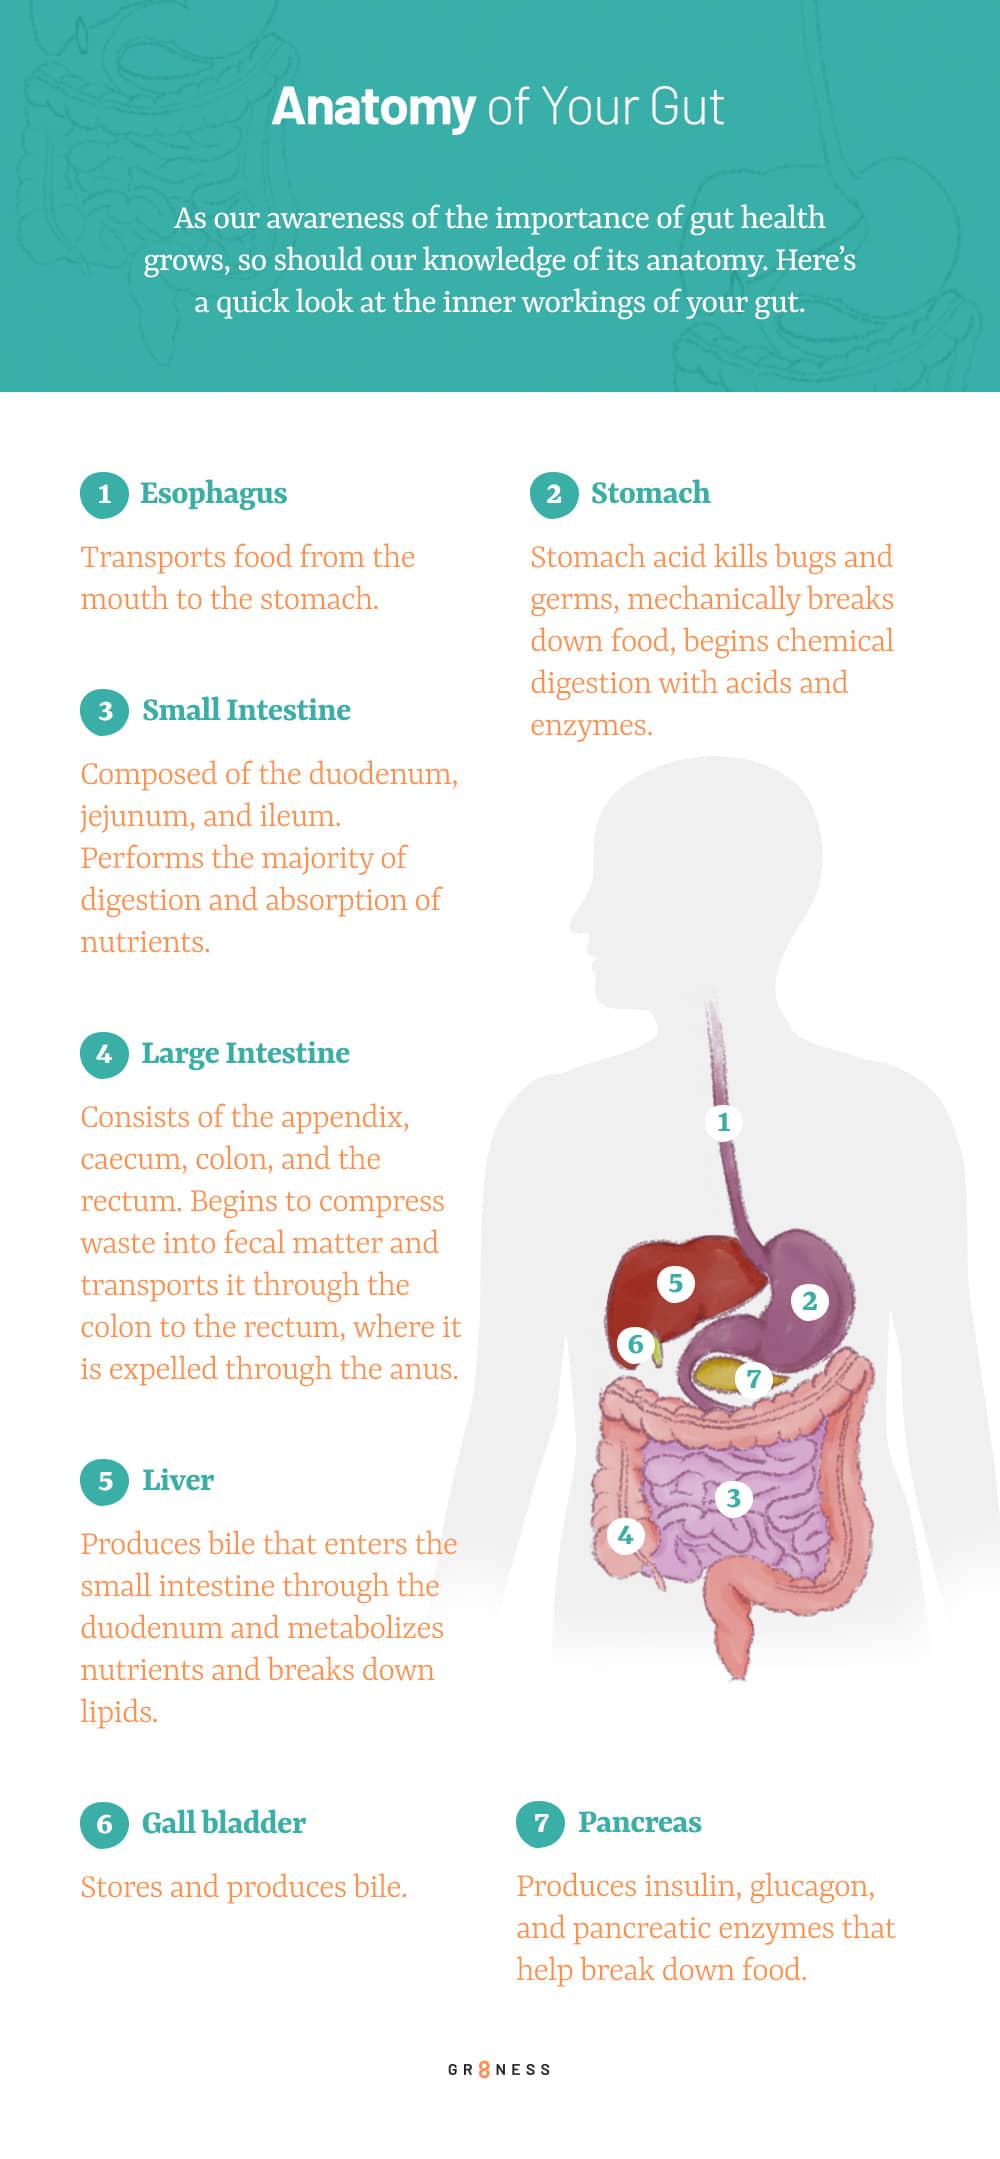 Step by step guide of anatomy of the human gut